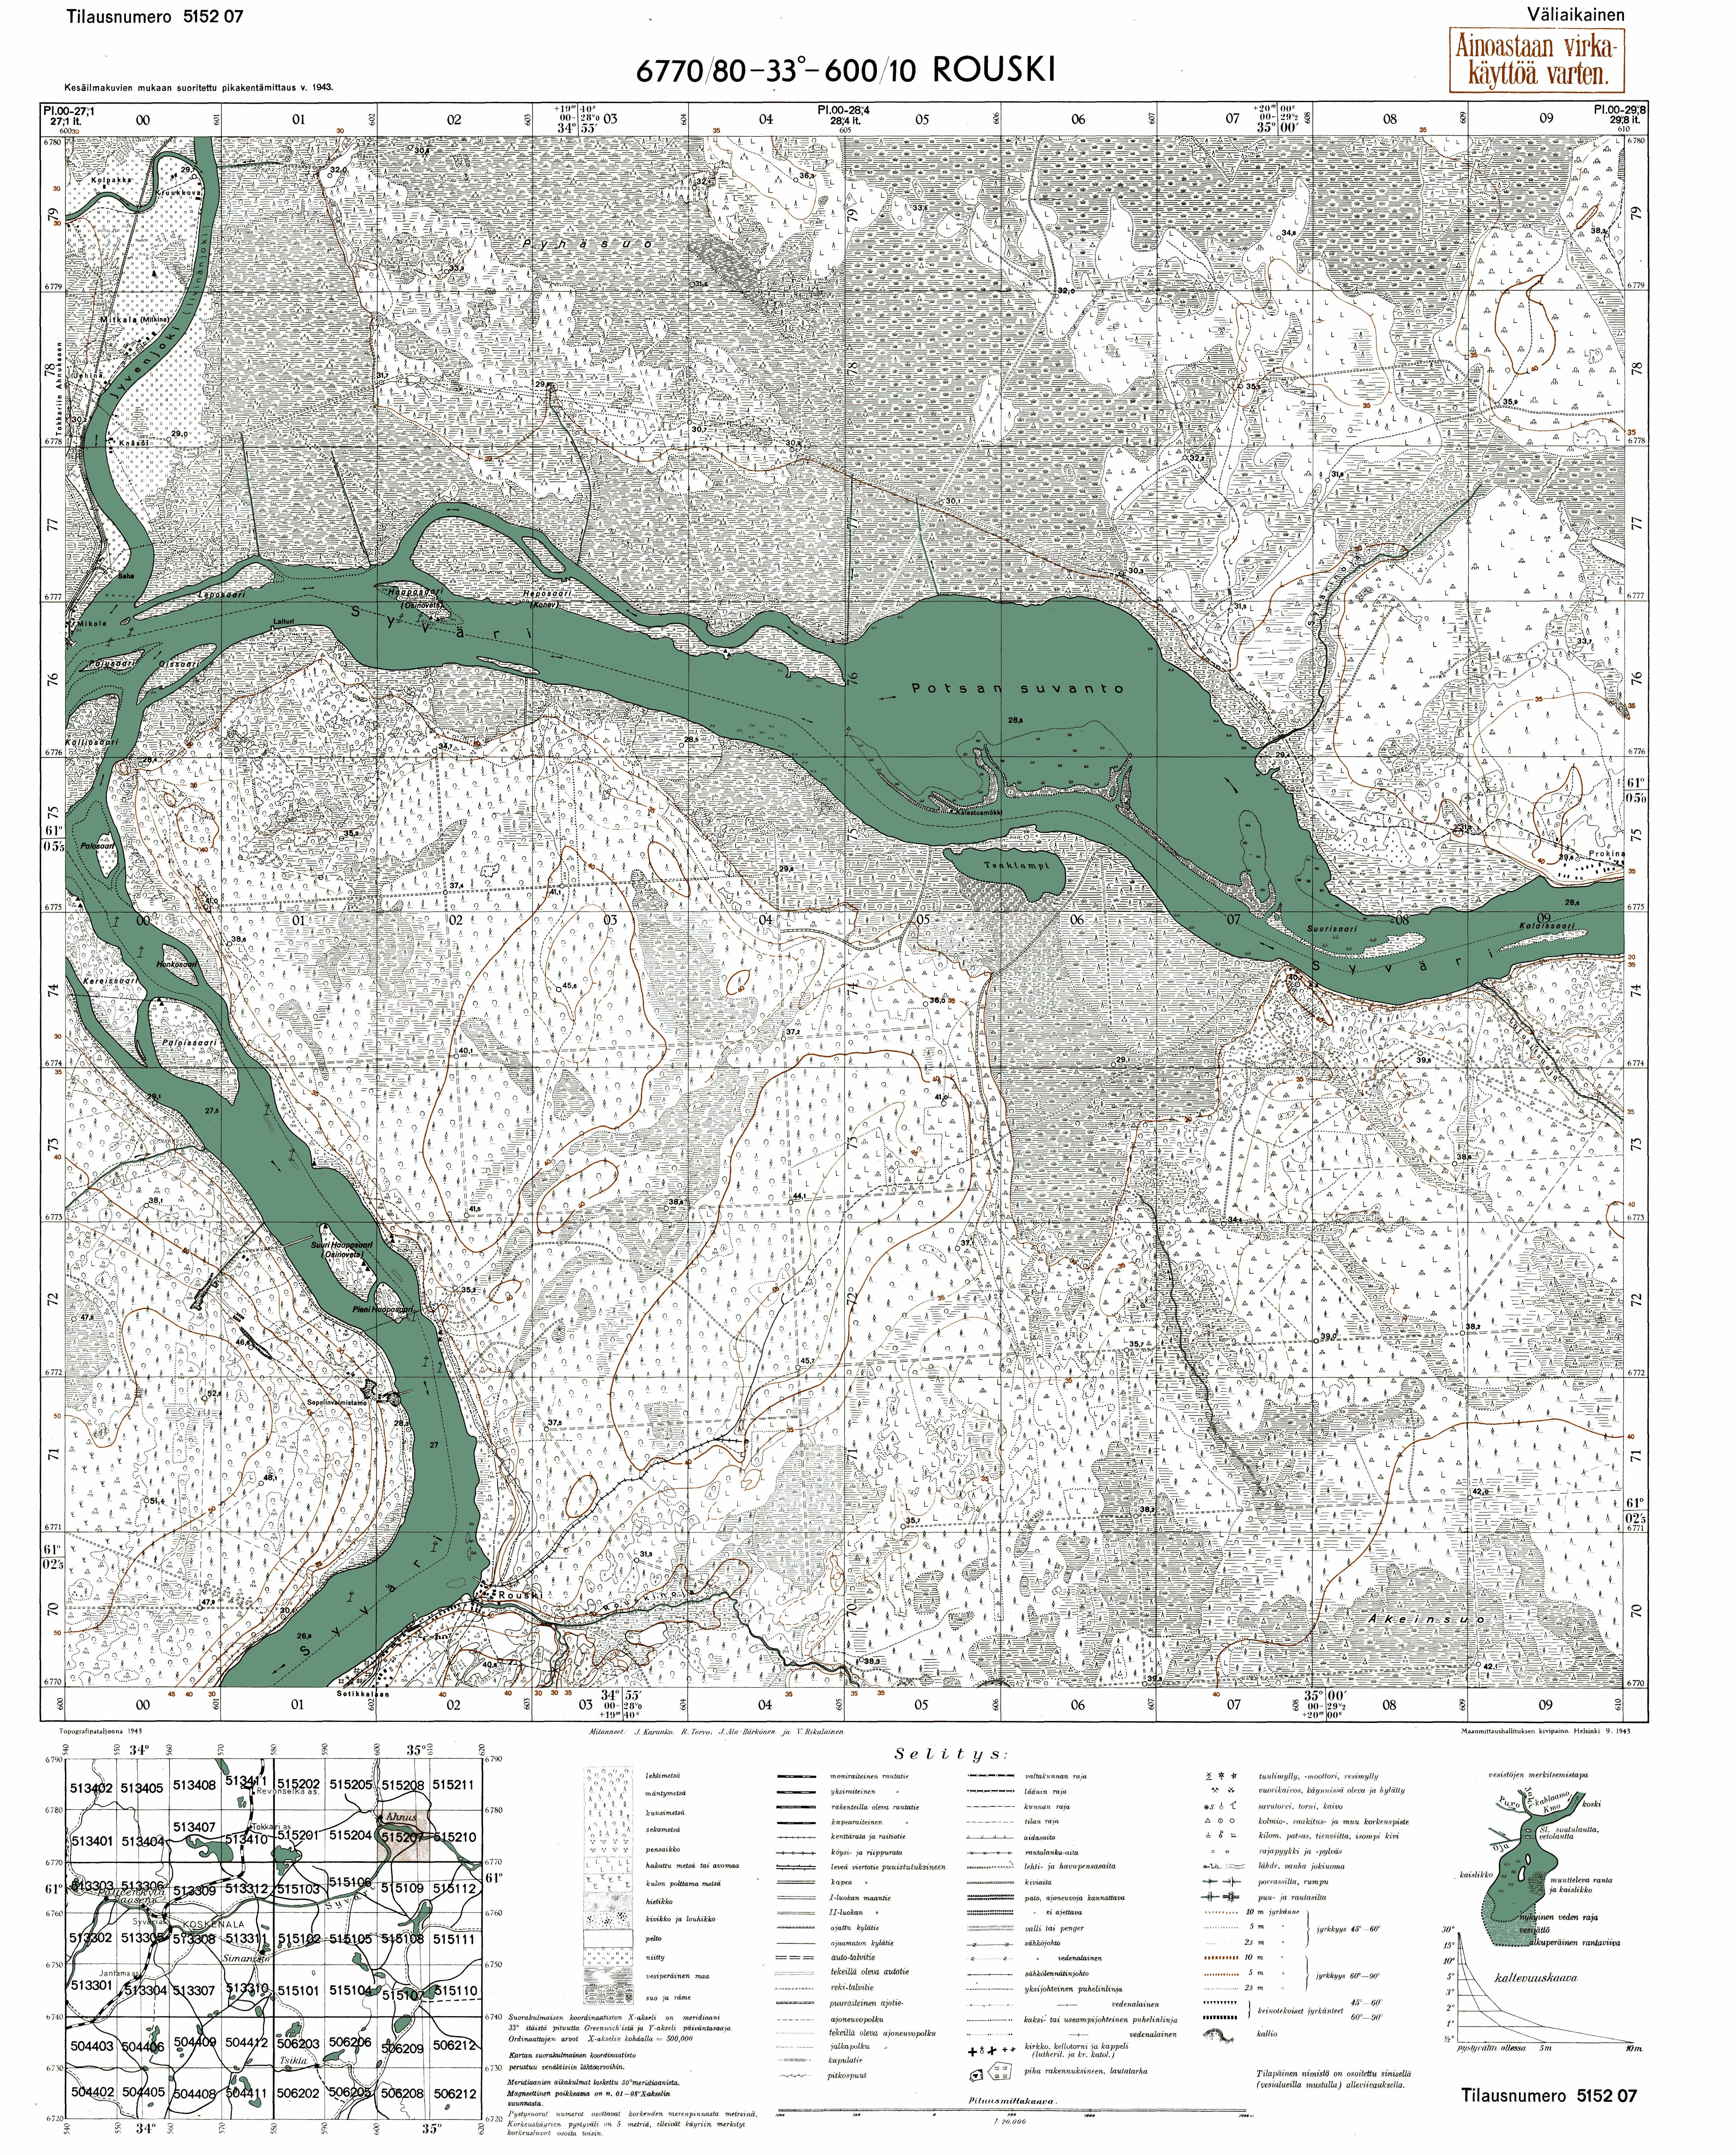 Rovskoj. Rouski. Topografikartta 515207. Topographic map from 1943. Use the zooming tool to explore in higher level of detail. Obtain as a quality print or high resolution image